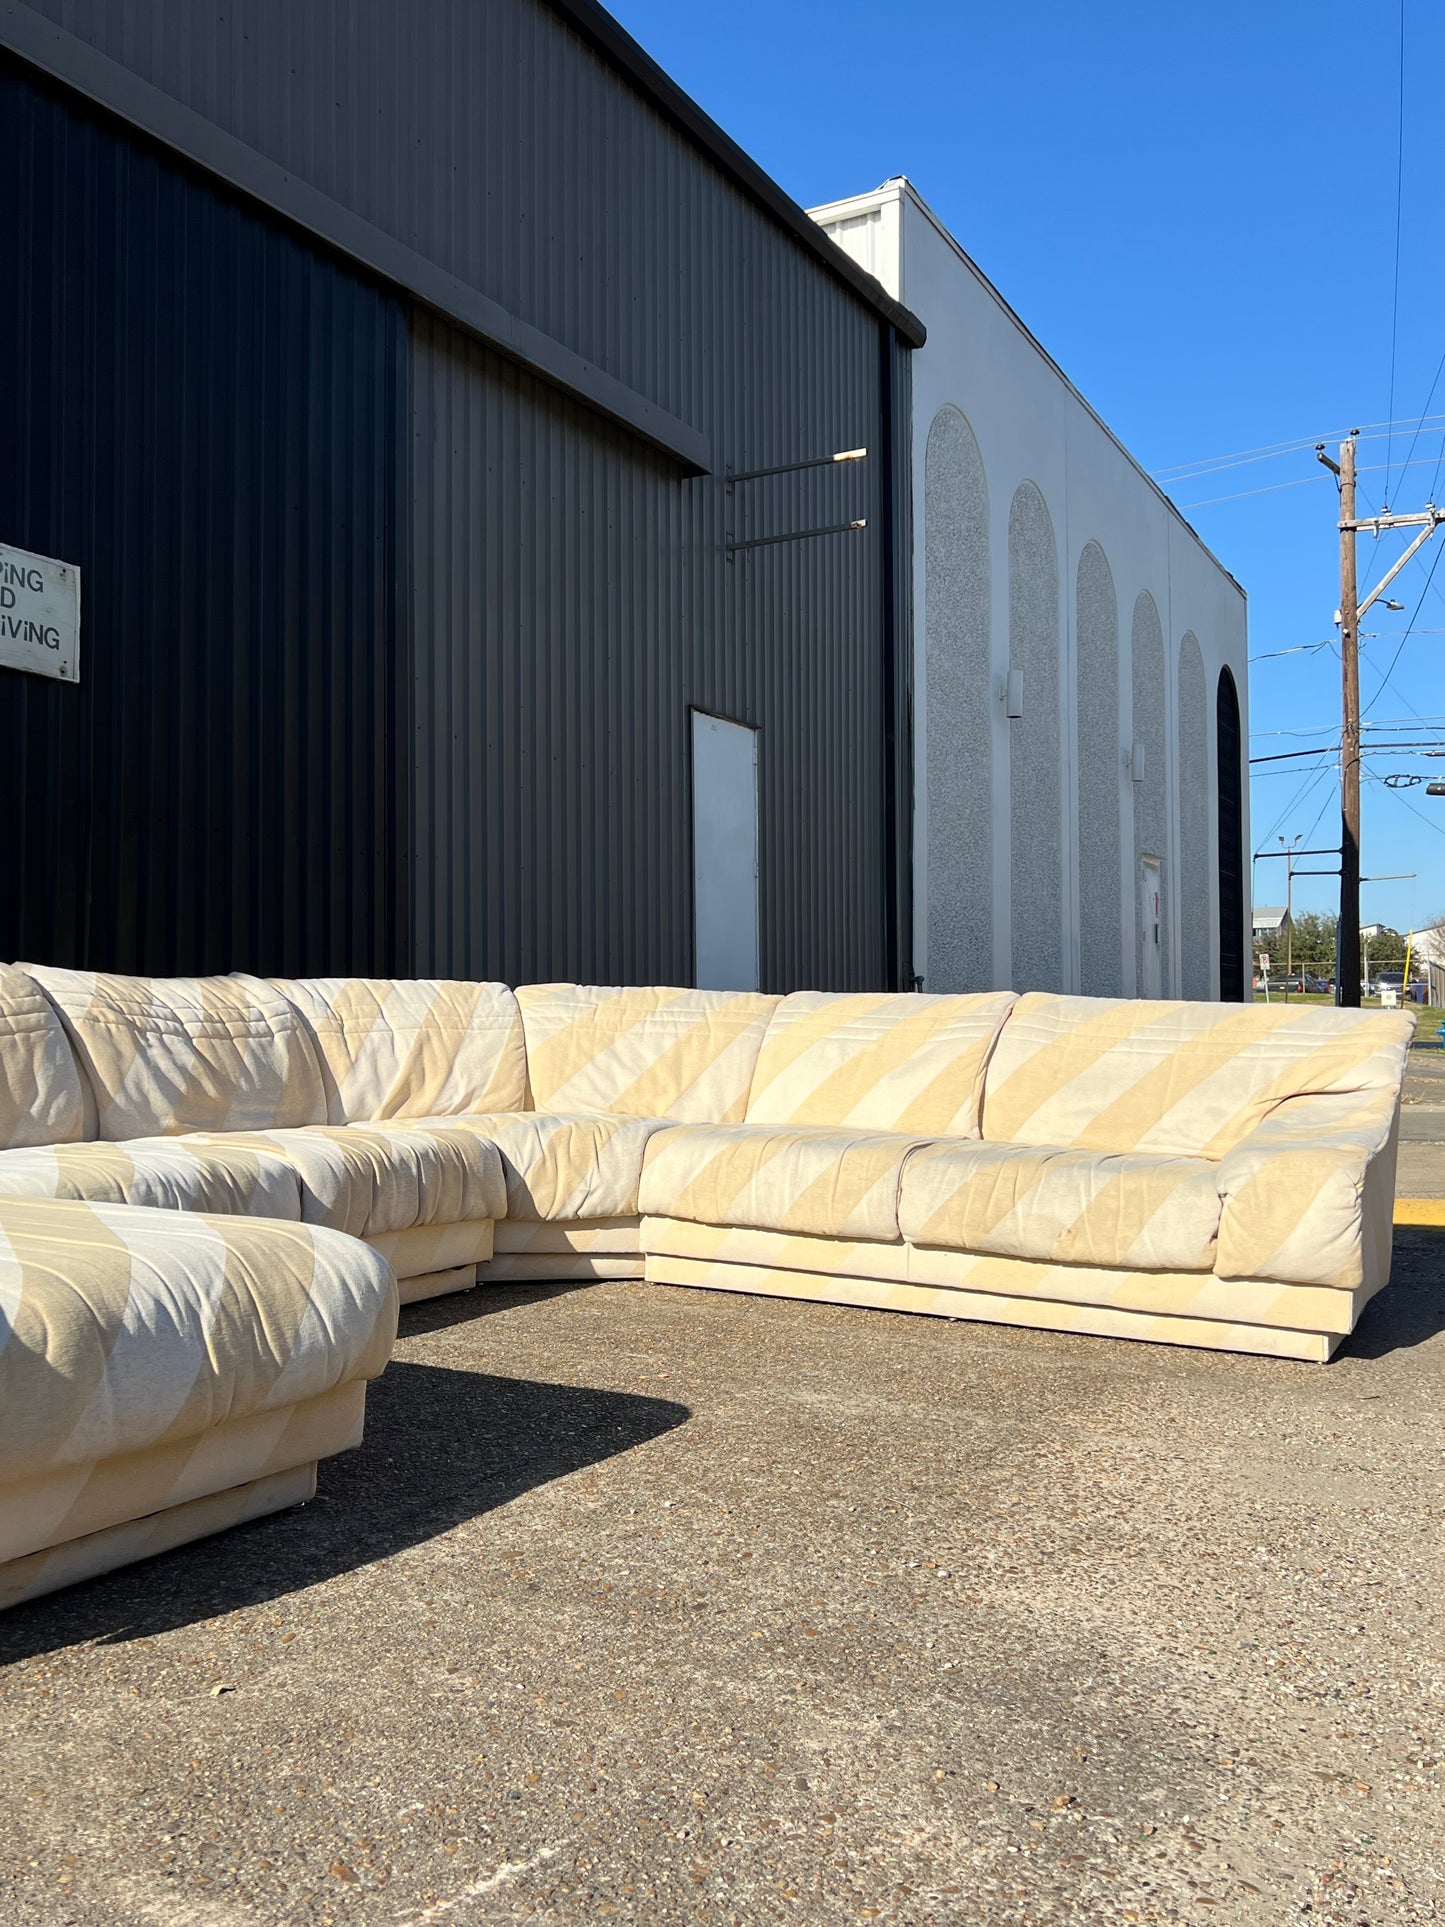 VINTAGE 4 PIECE SECTIONAL WITH CHAISE